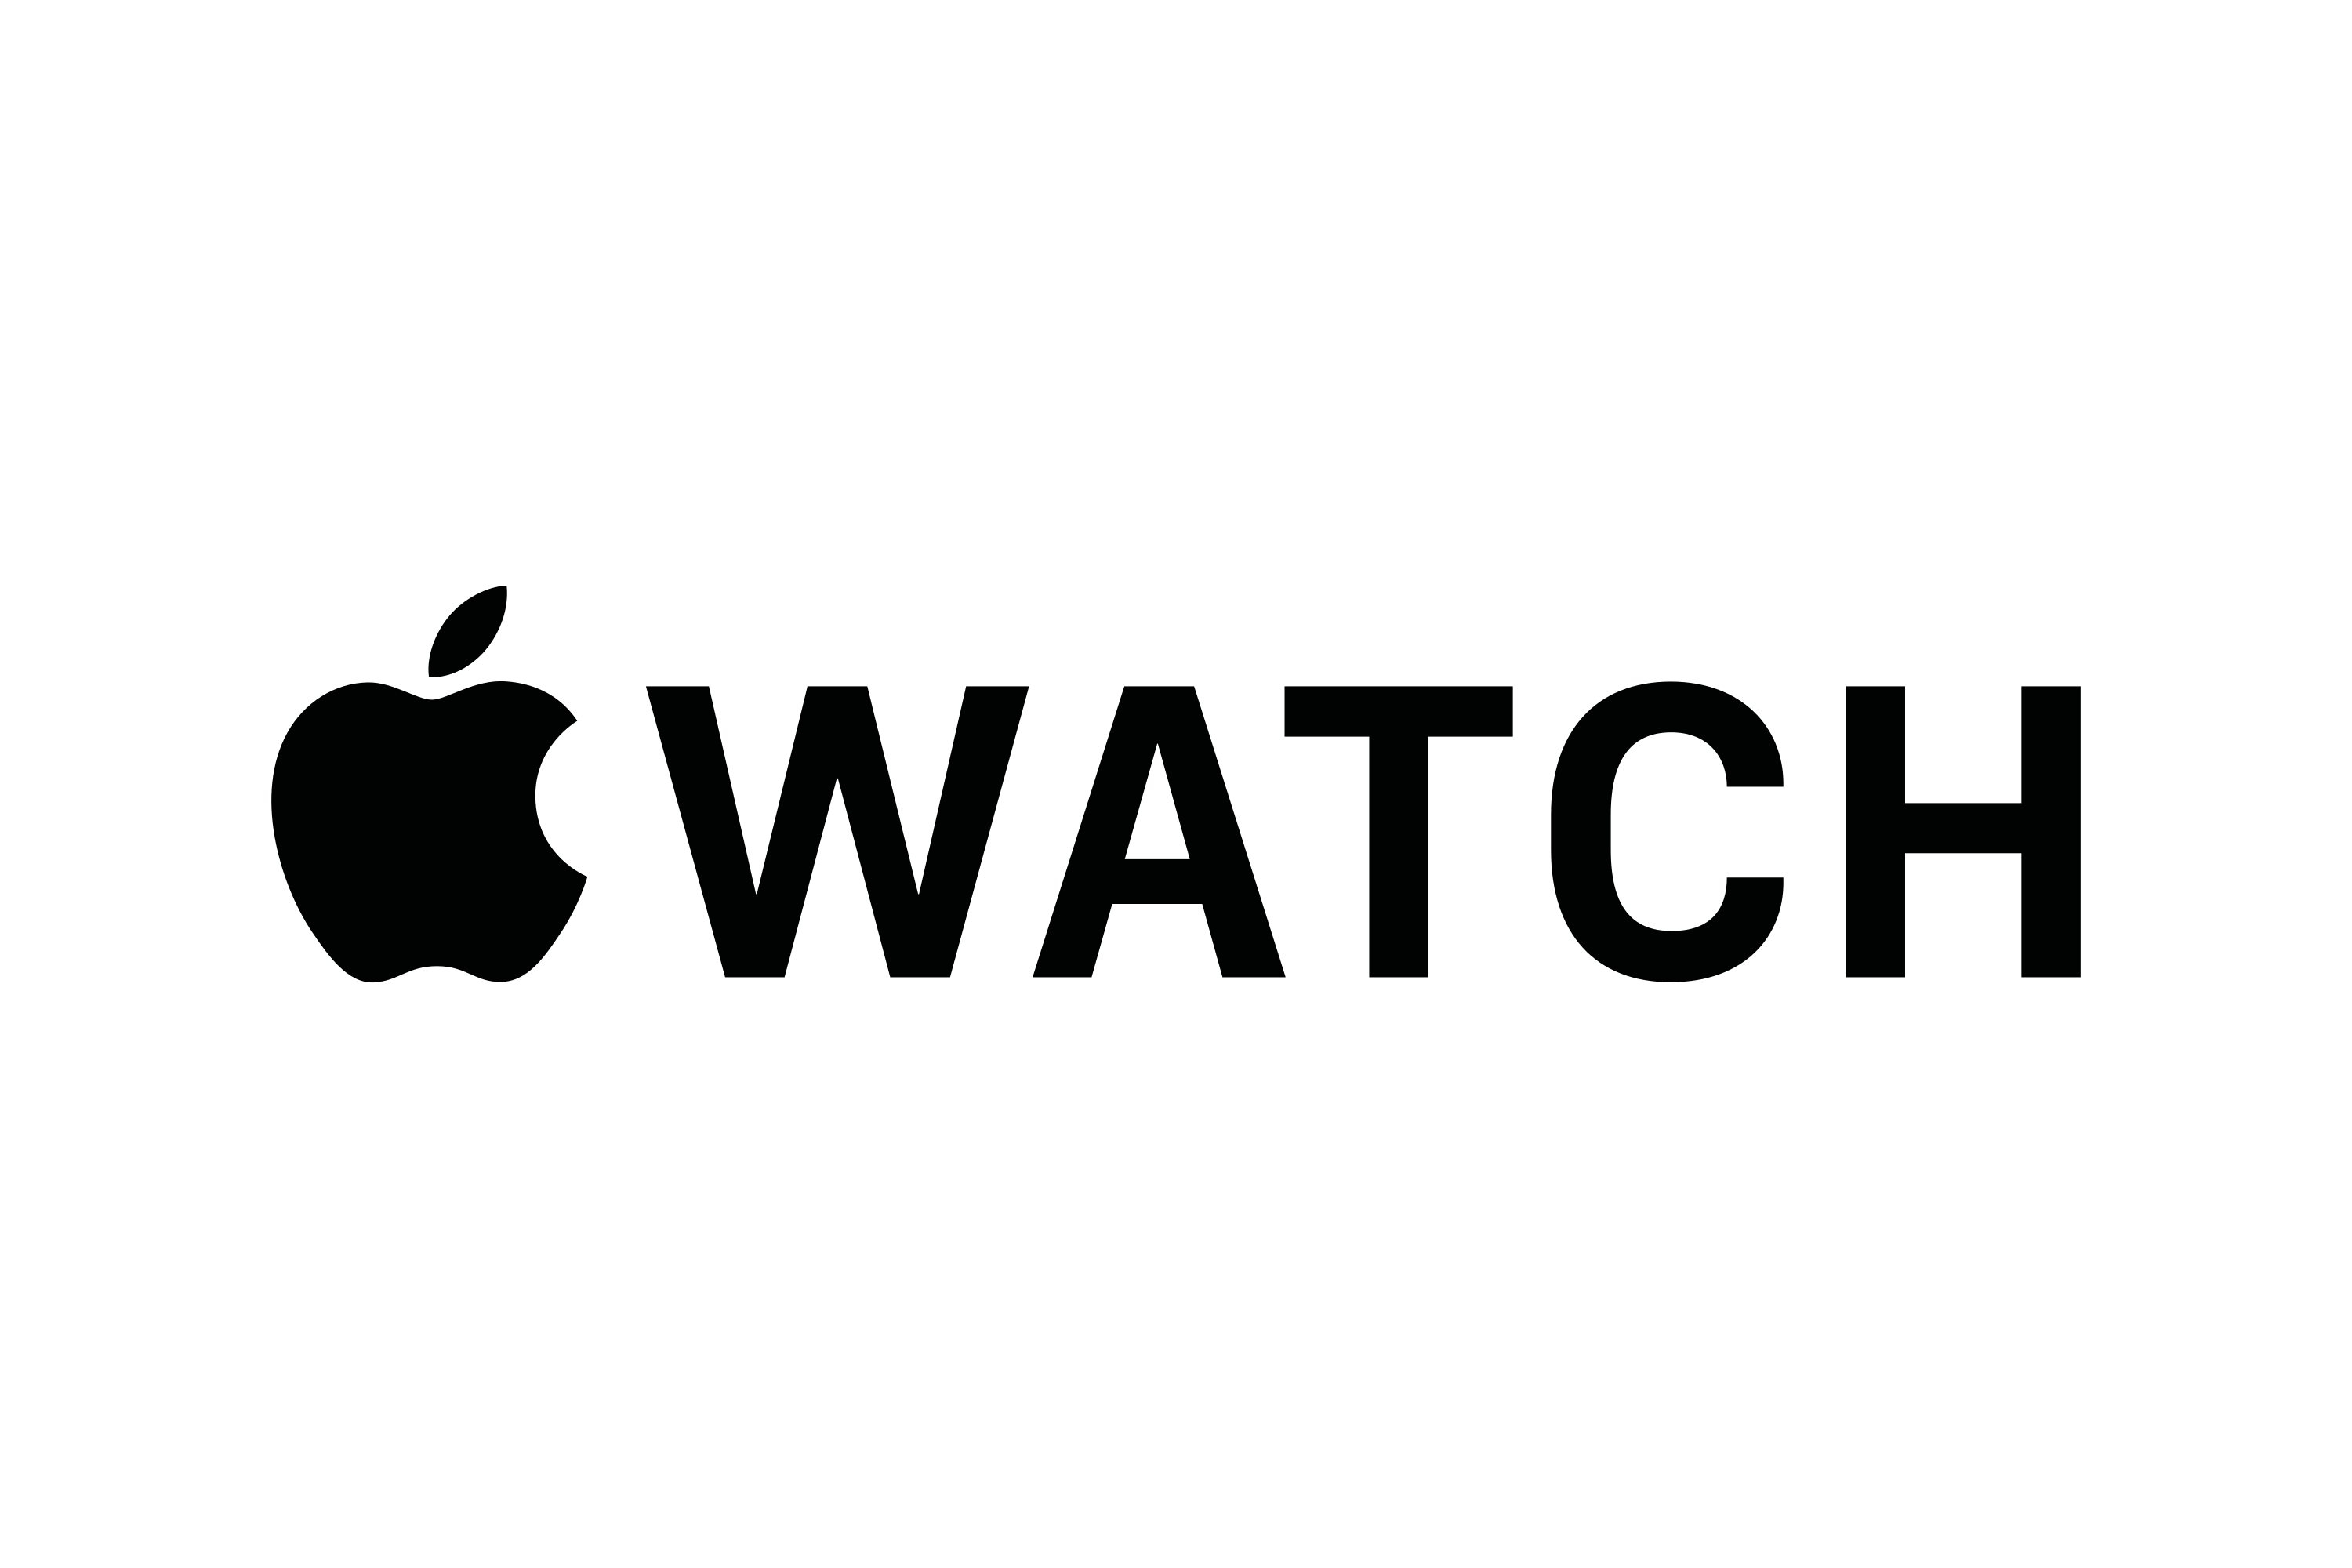 Download Apple Watch Series 3 Logo in SVG Vector or PNG File Format